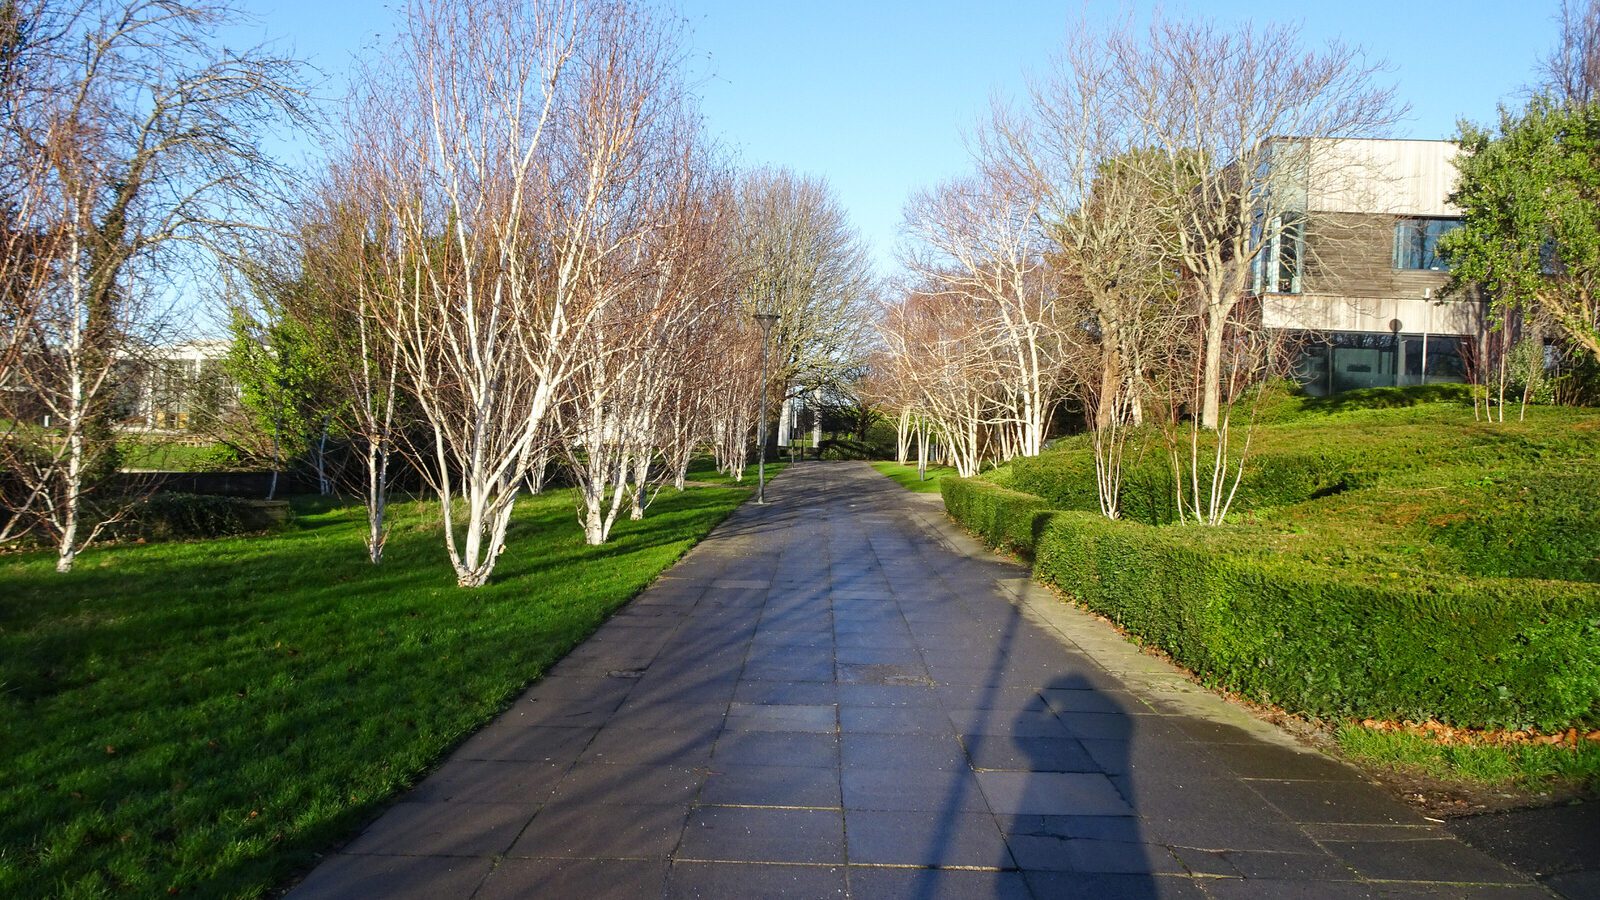 RANDOM IMAGES OF THE UNIVERSITY OF DUBLIN CAMPUS [MY MOTHER WHO IS 104 IN MAY DID NOT WANT TO COME WITH ME AS IT WAS TOO COLD]-226724-1